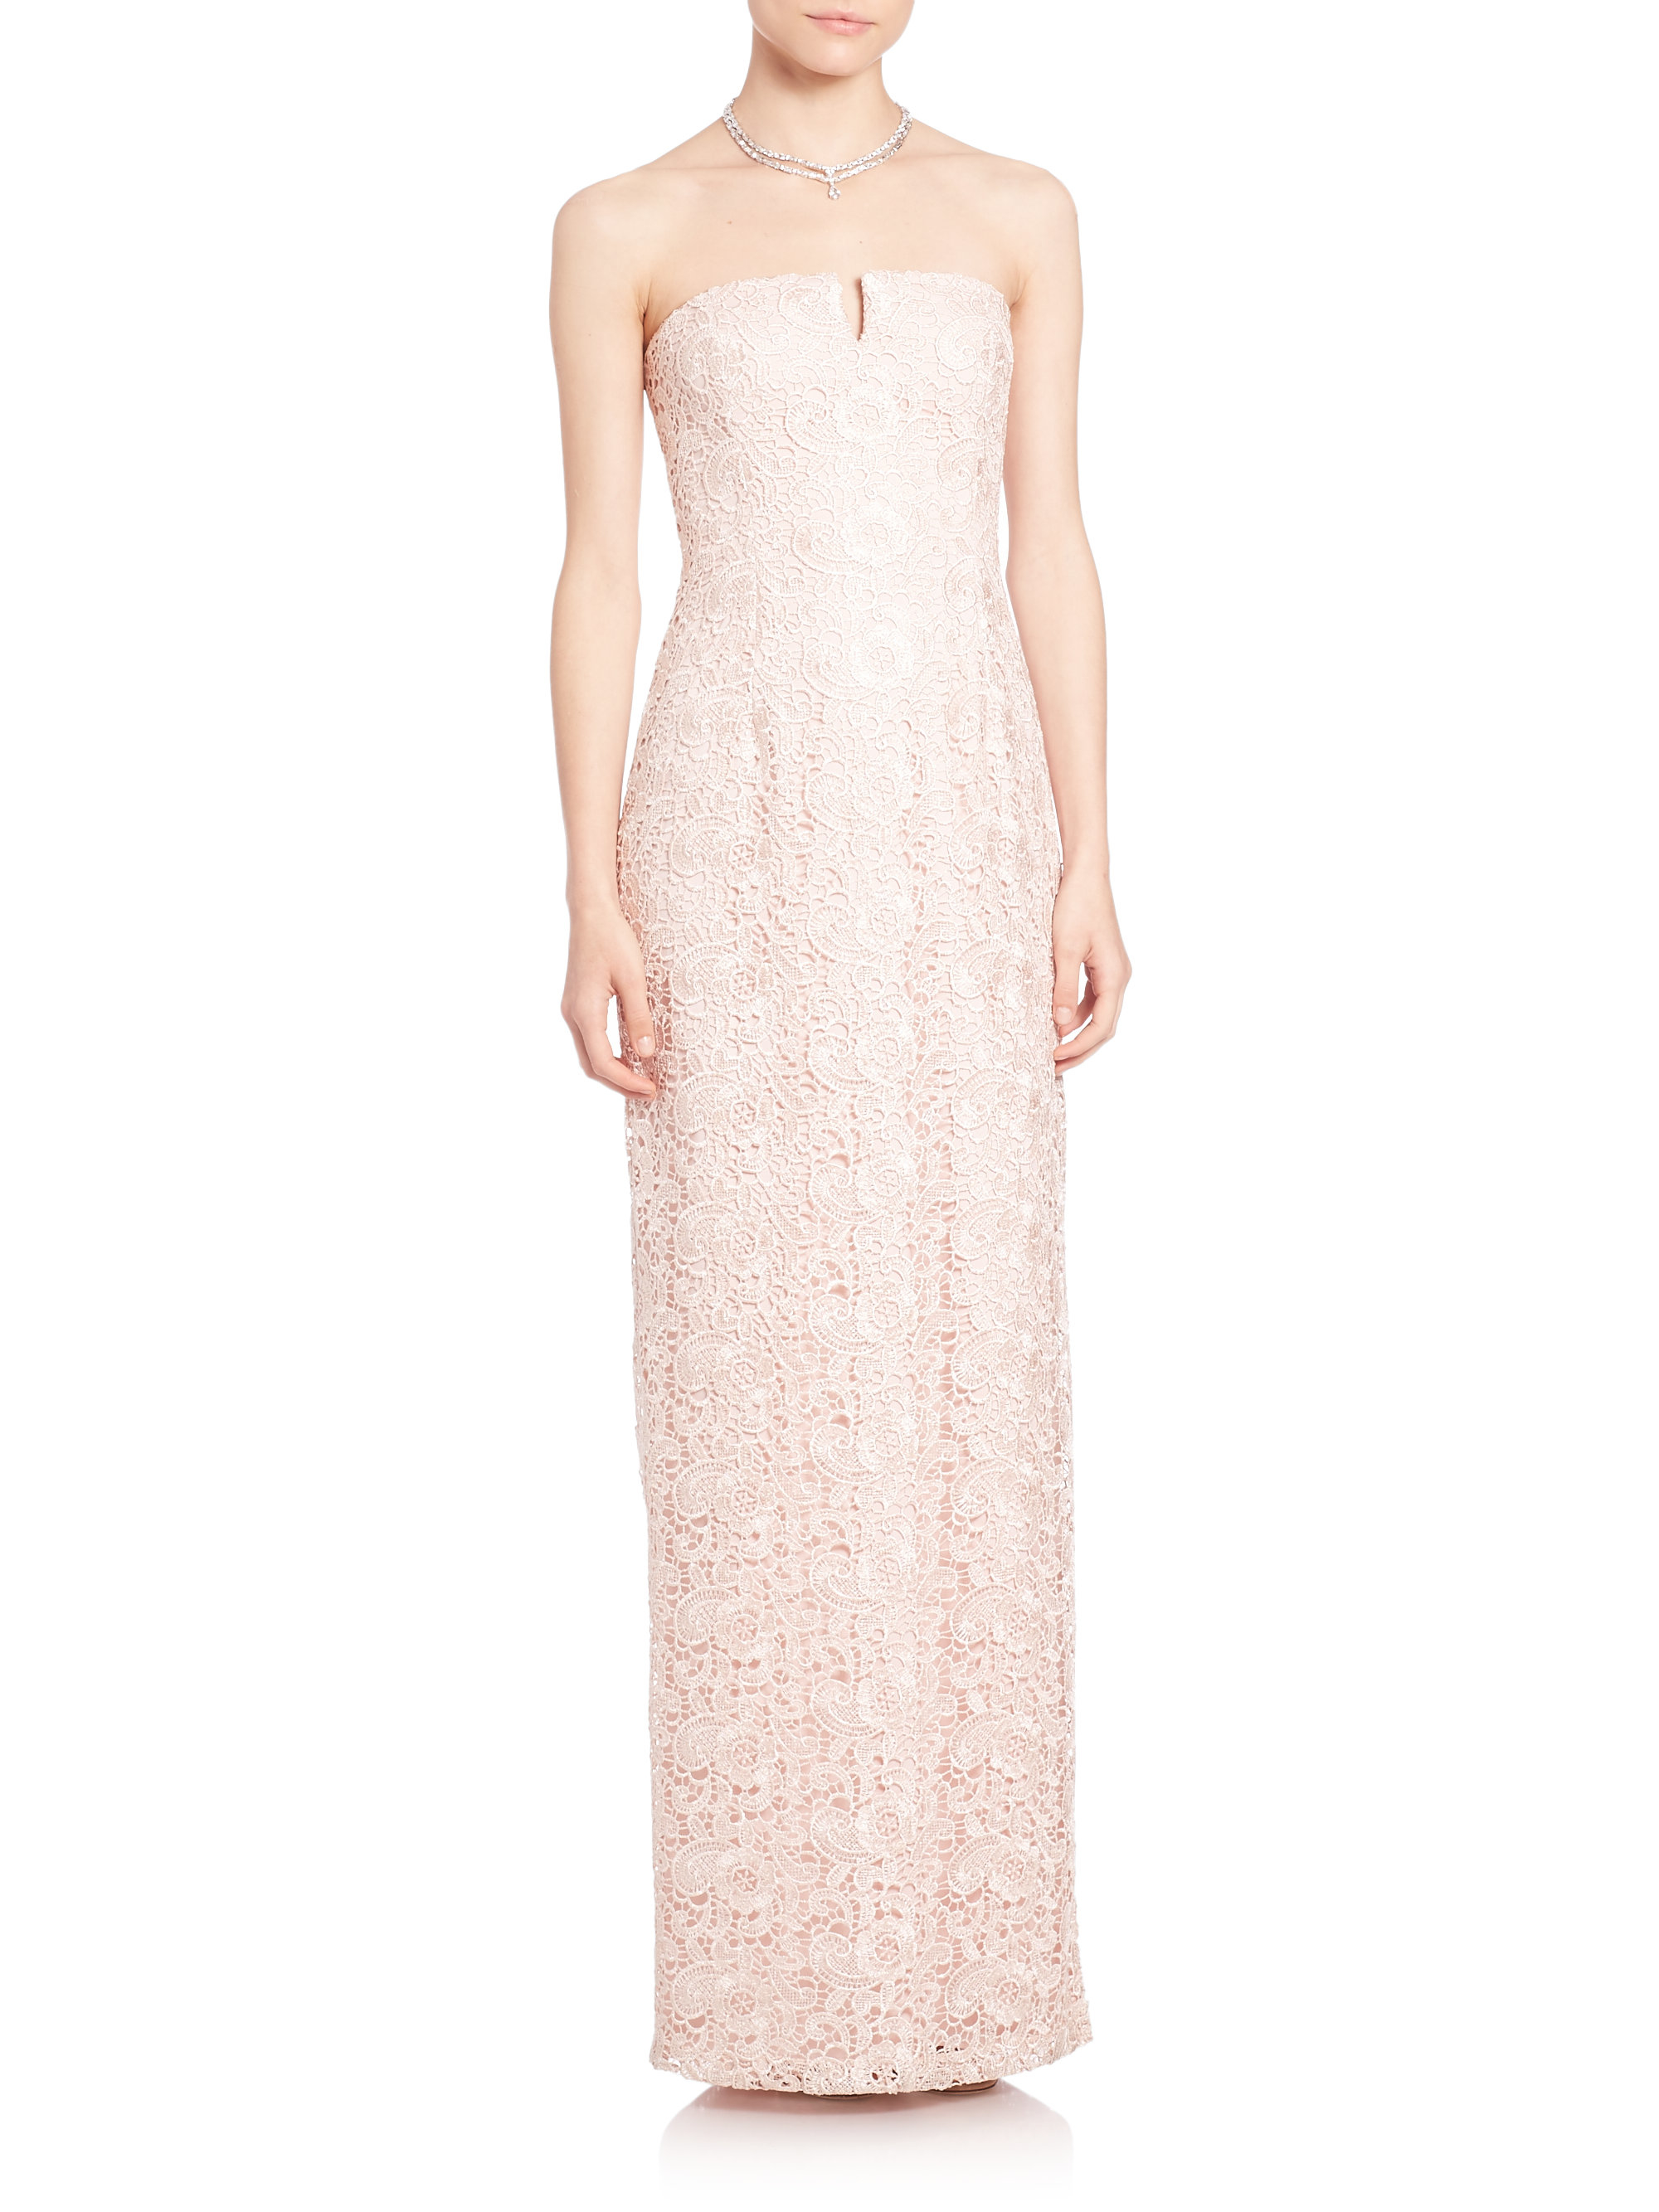 Lyst - Aidan Mattox Strapless Lace Bridesmaid Gown in Pink